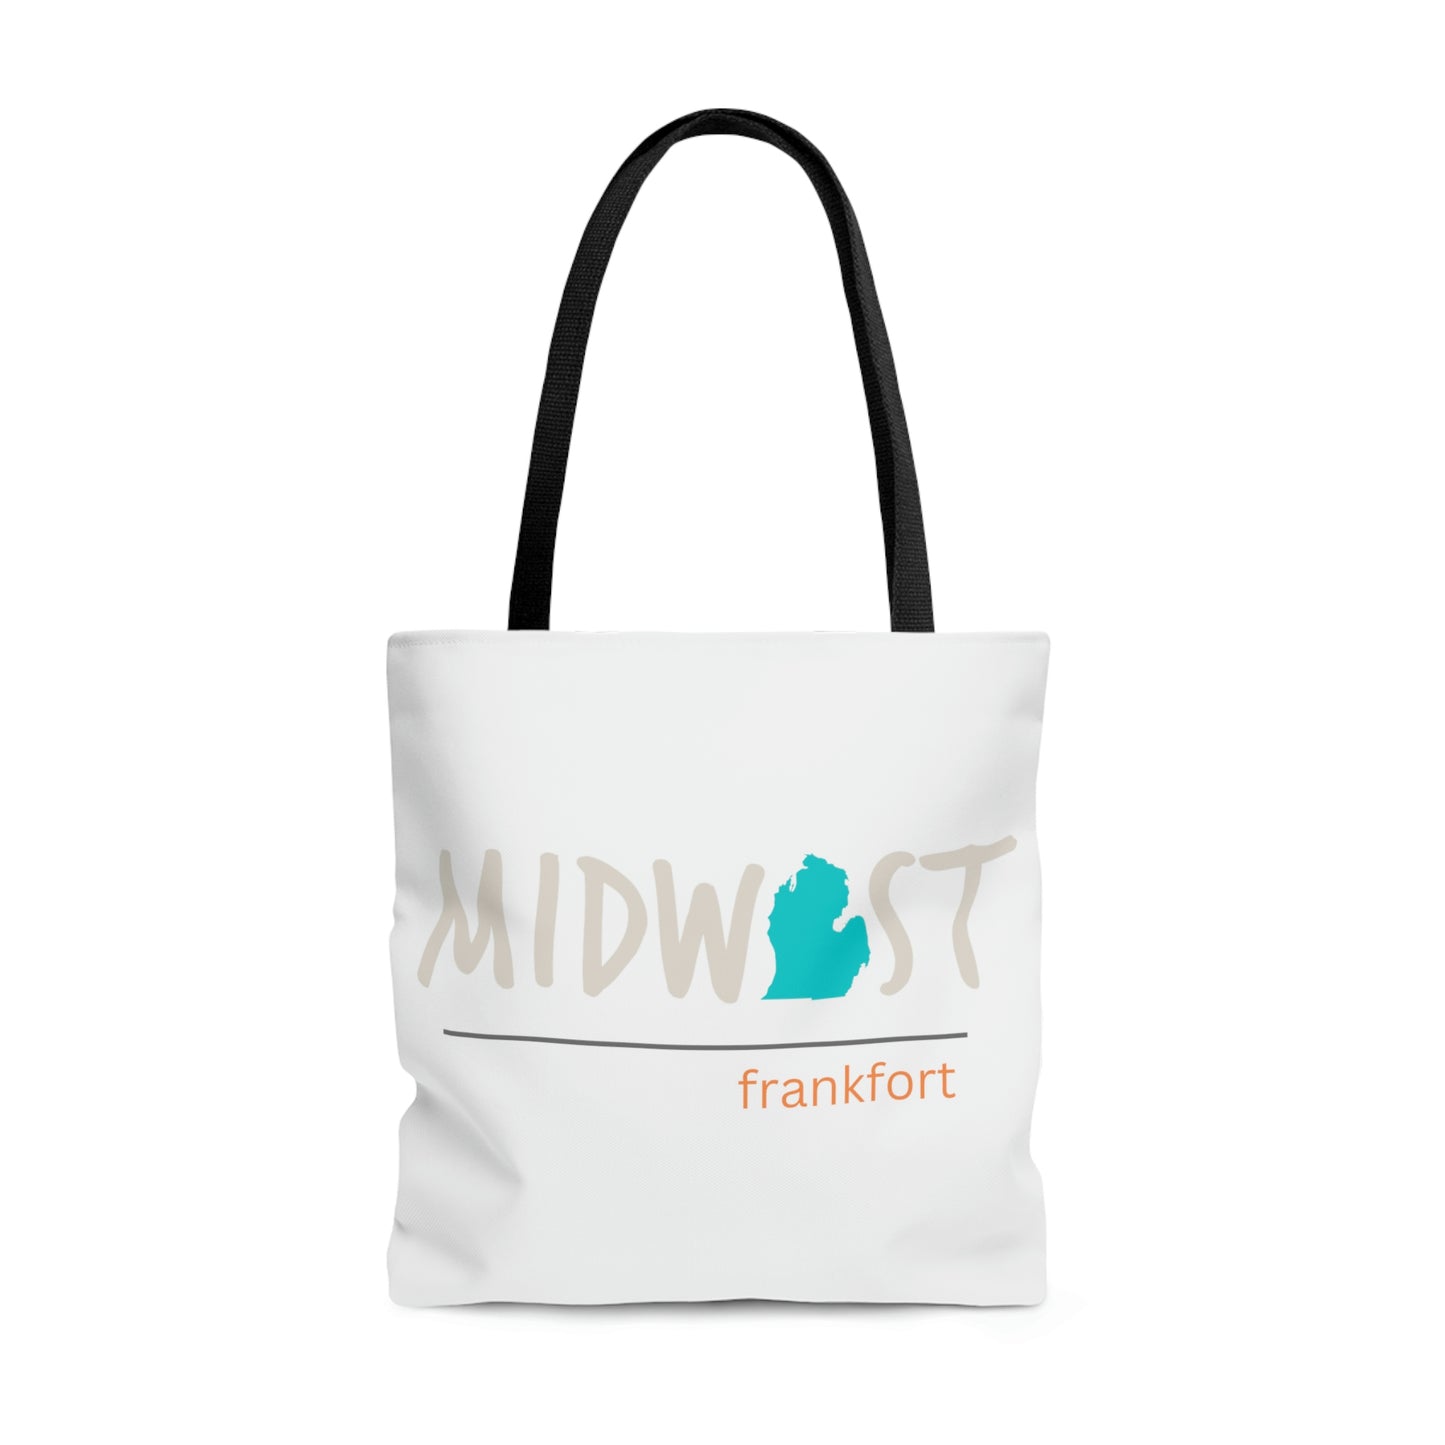 Michigan Midwest Frankfort 'Look Sharp' Tote